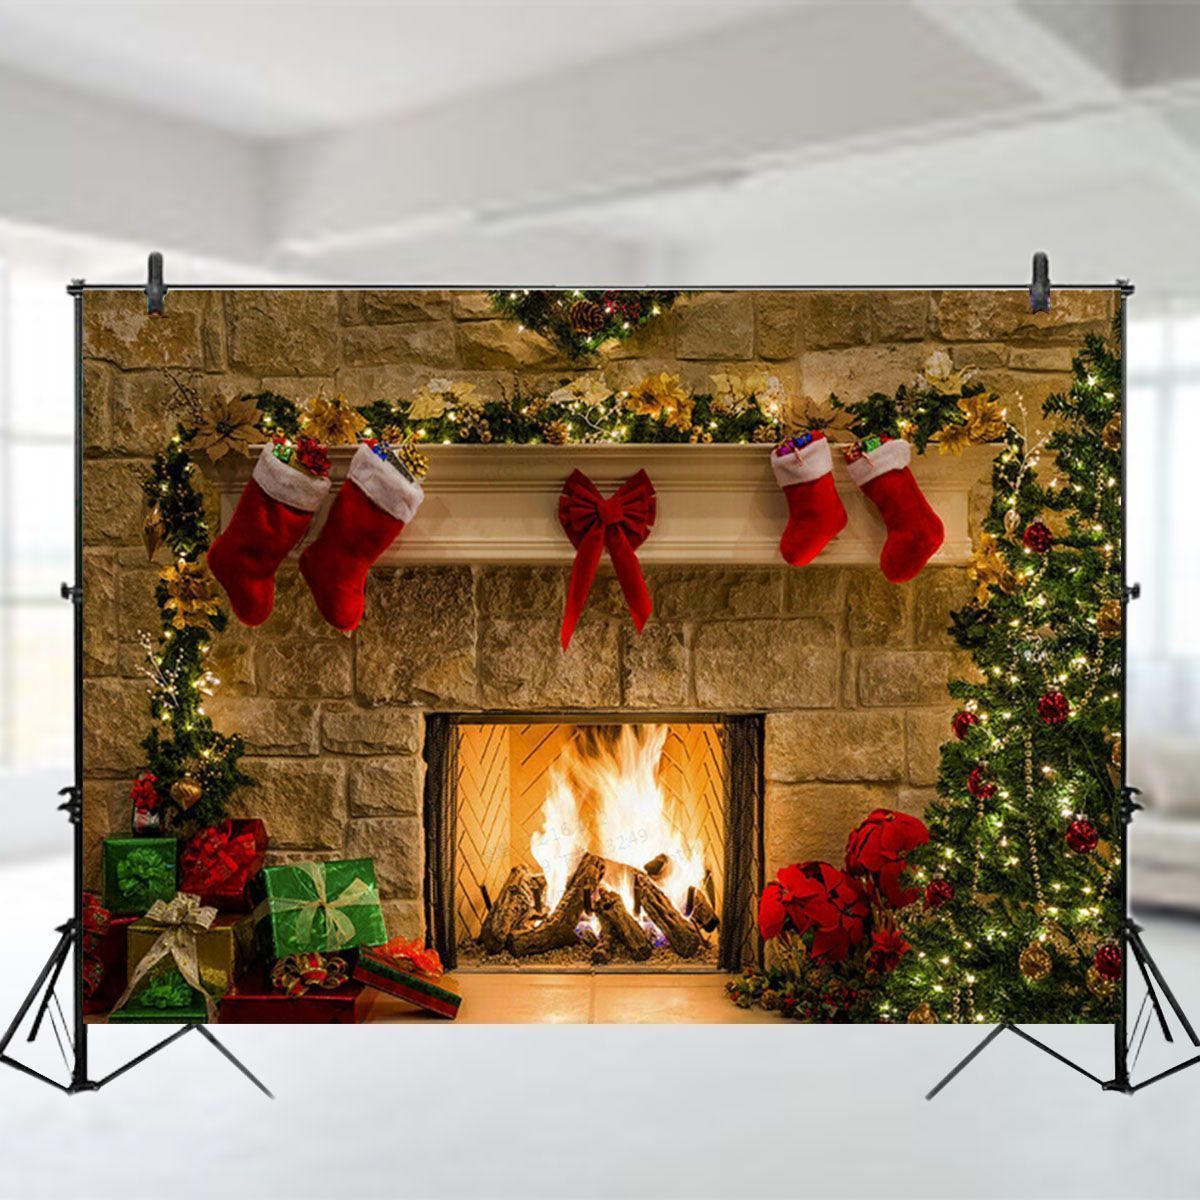 5x3FT-7x5FT-10x7FT-Christmas-Fireplace-Red-Socks-Backdrop-Photography-Background-Cloth-Decoration-Ba-1698650